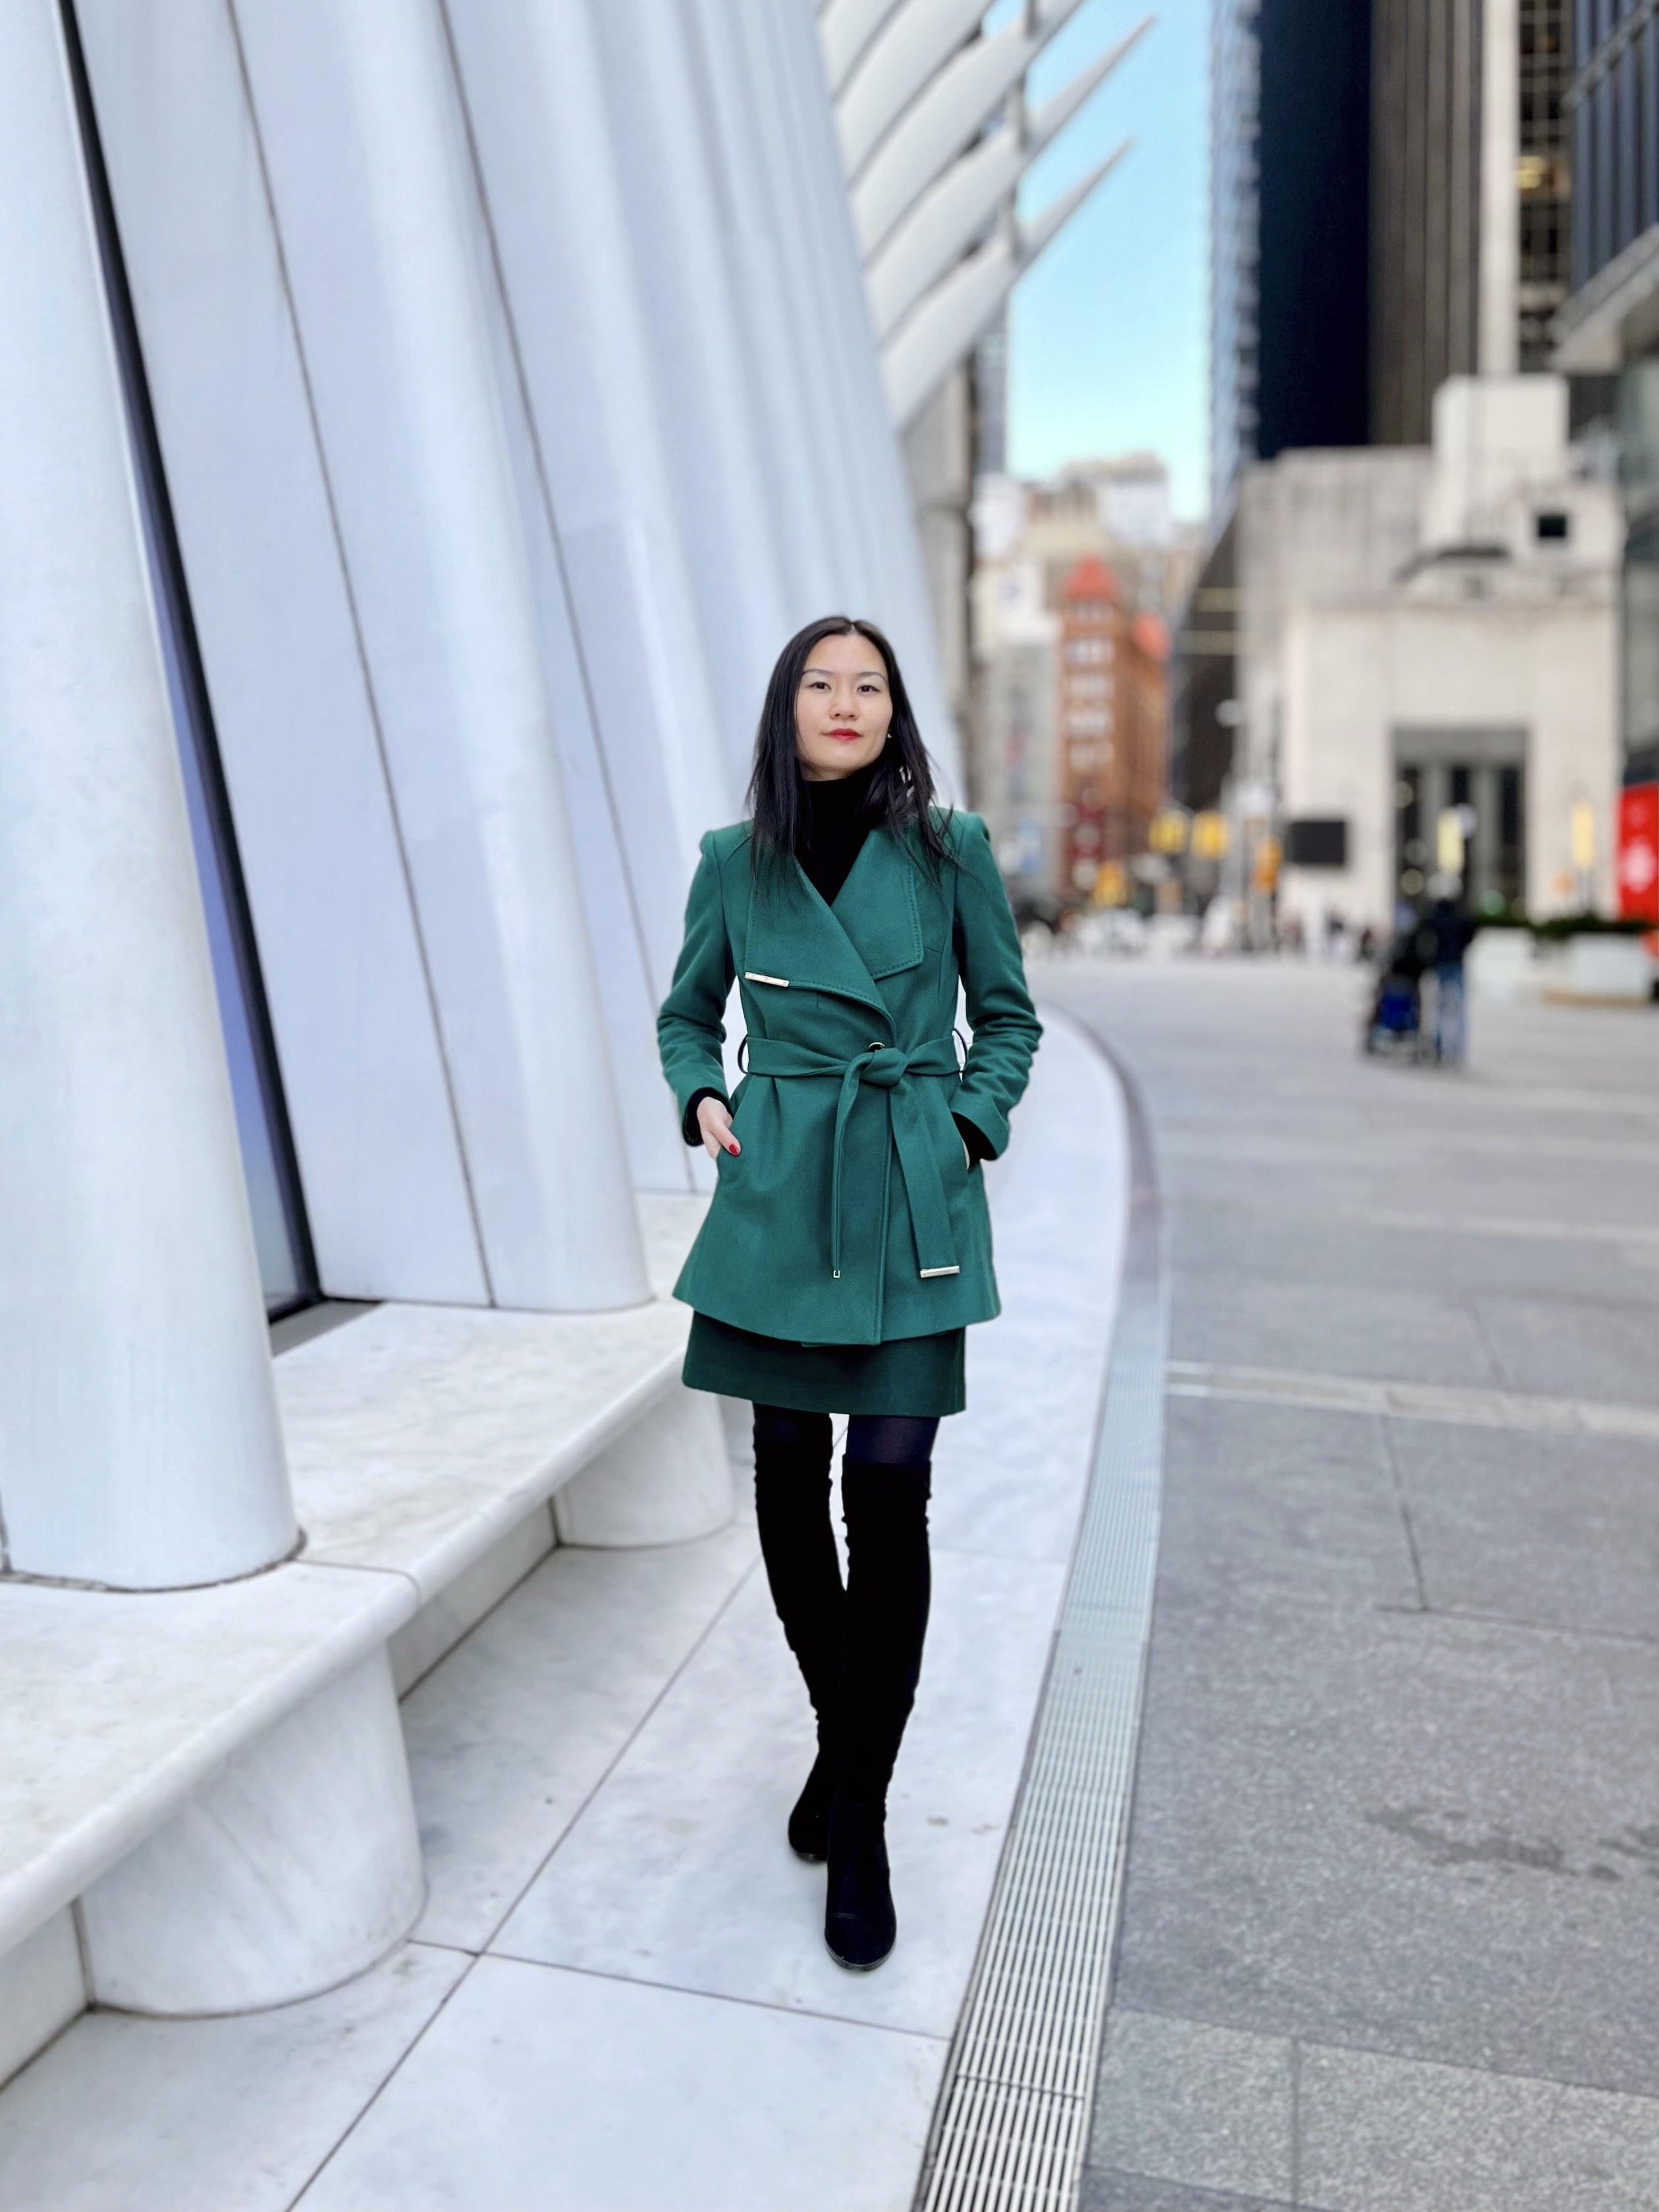 Ted Baker Wool Coat Review: Worth the Splurge? - Styled by Science